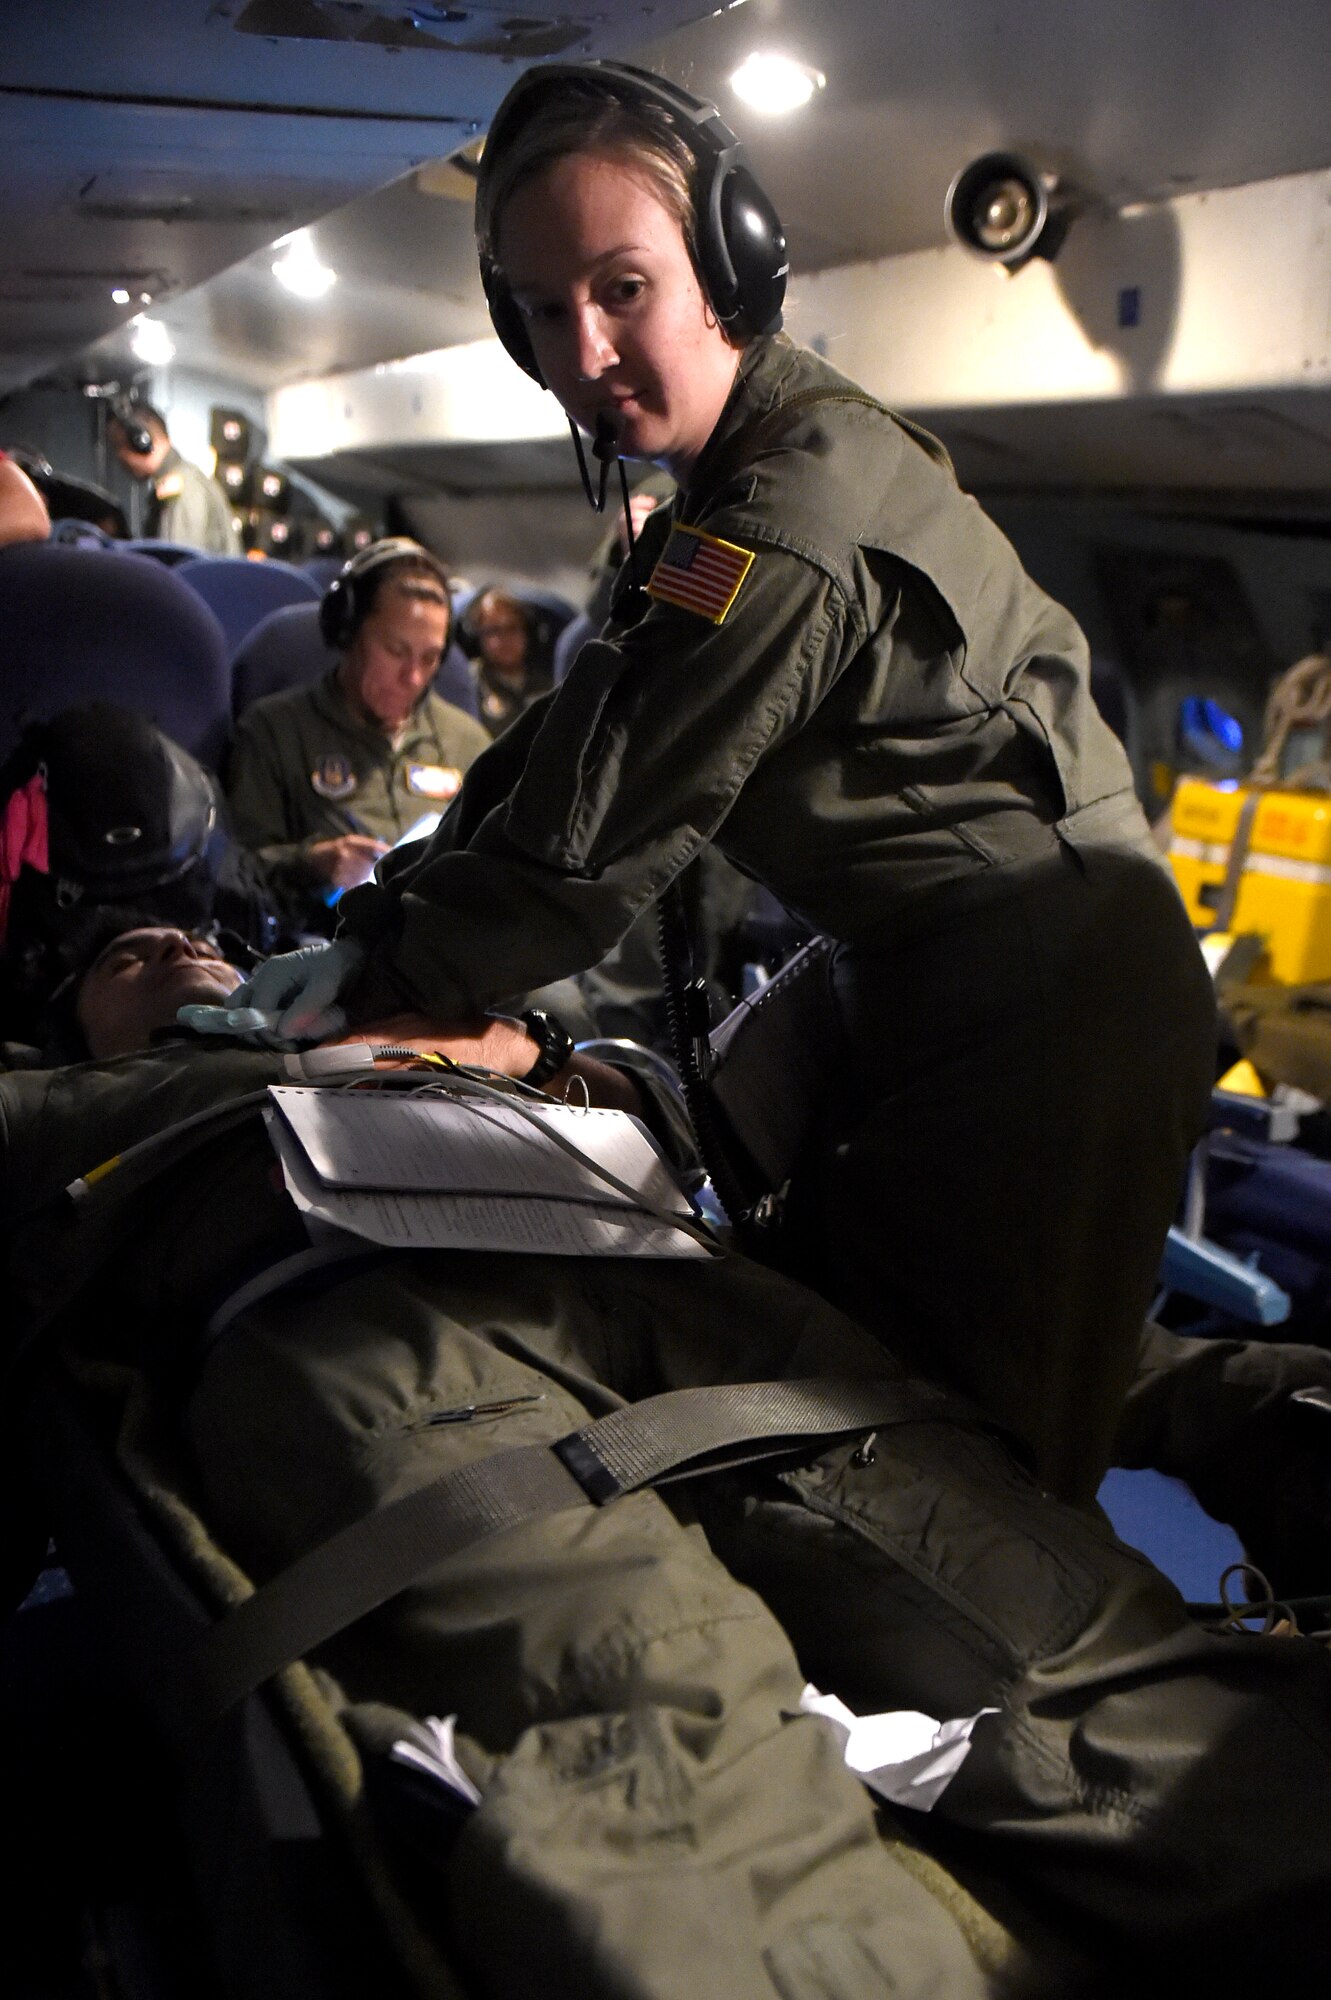 1st Lt. Stefanie Callen, 433rd Aeromedical Evacuation Squadron flight nurse, performs compressions on a patient during a training scenario aboard a C-5 Galaxy aircraft Oct. 7, 2015 at Joint Base San Antonio-Lackland, Texas. Configuring a C-5 to meet their needs, the 433rd AES members established and met requirements to conduct Aeromedical Readiness Missions while maintaining the focus on the patient, significantly improving the efficiency and effectiveness of safe and responsive patients globally. (U.S. Air Force photo by Senior Airman Keith James/Released)